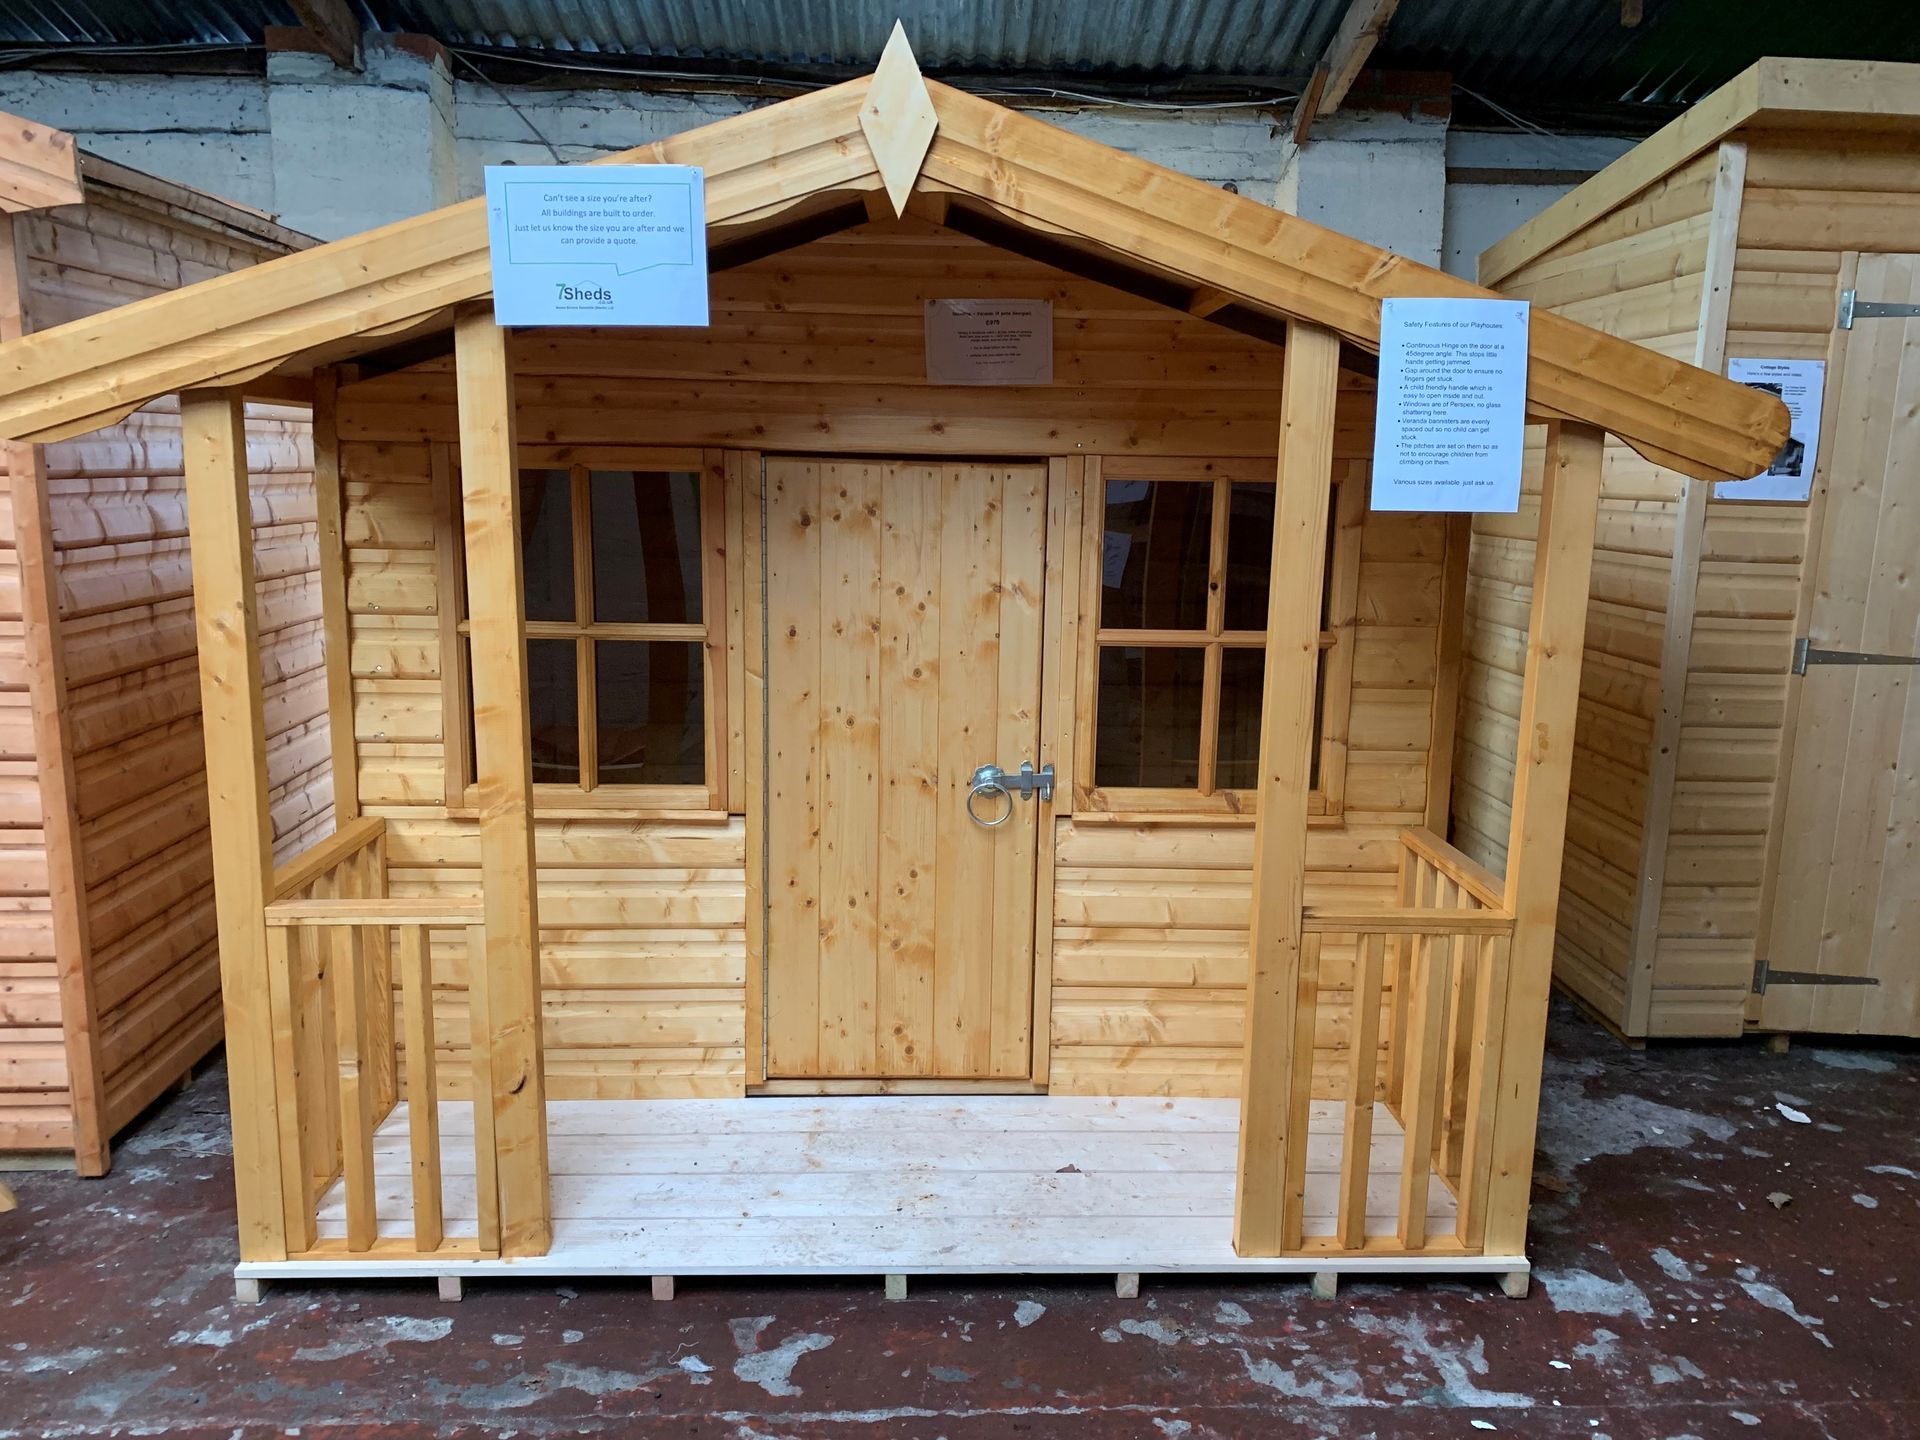 Playhouse for children with veranda and safety features